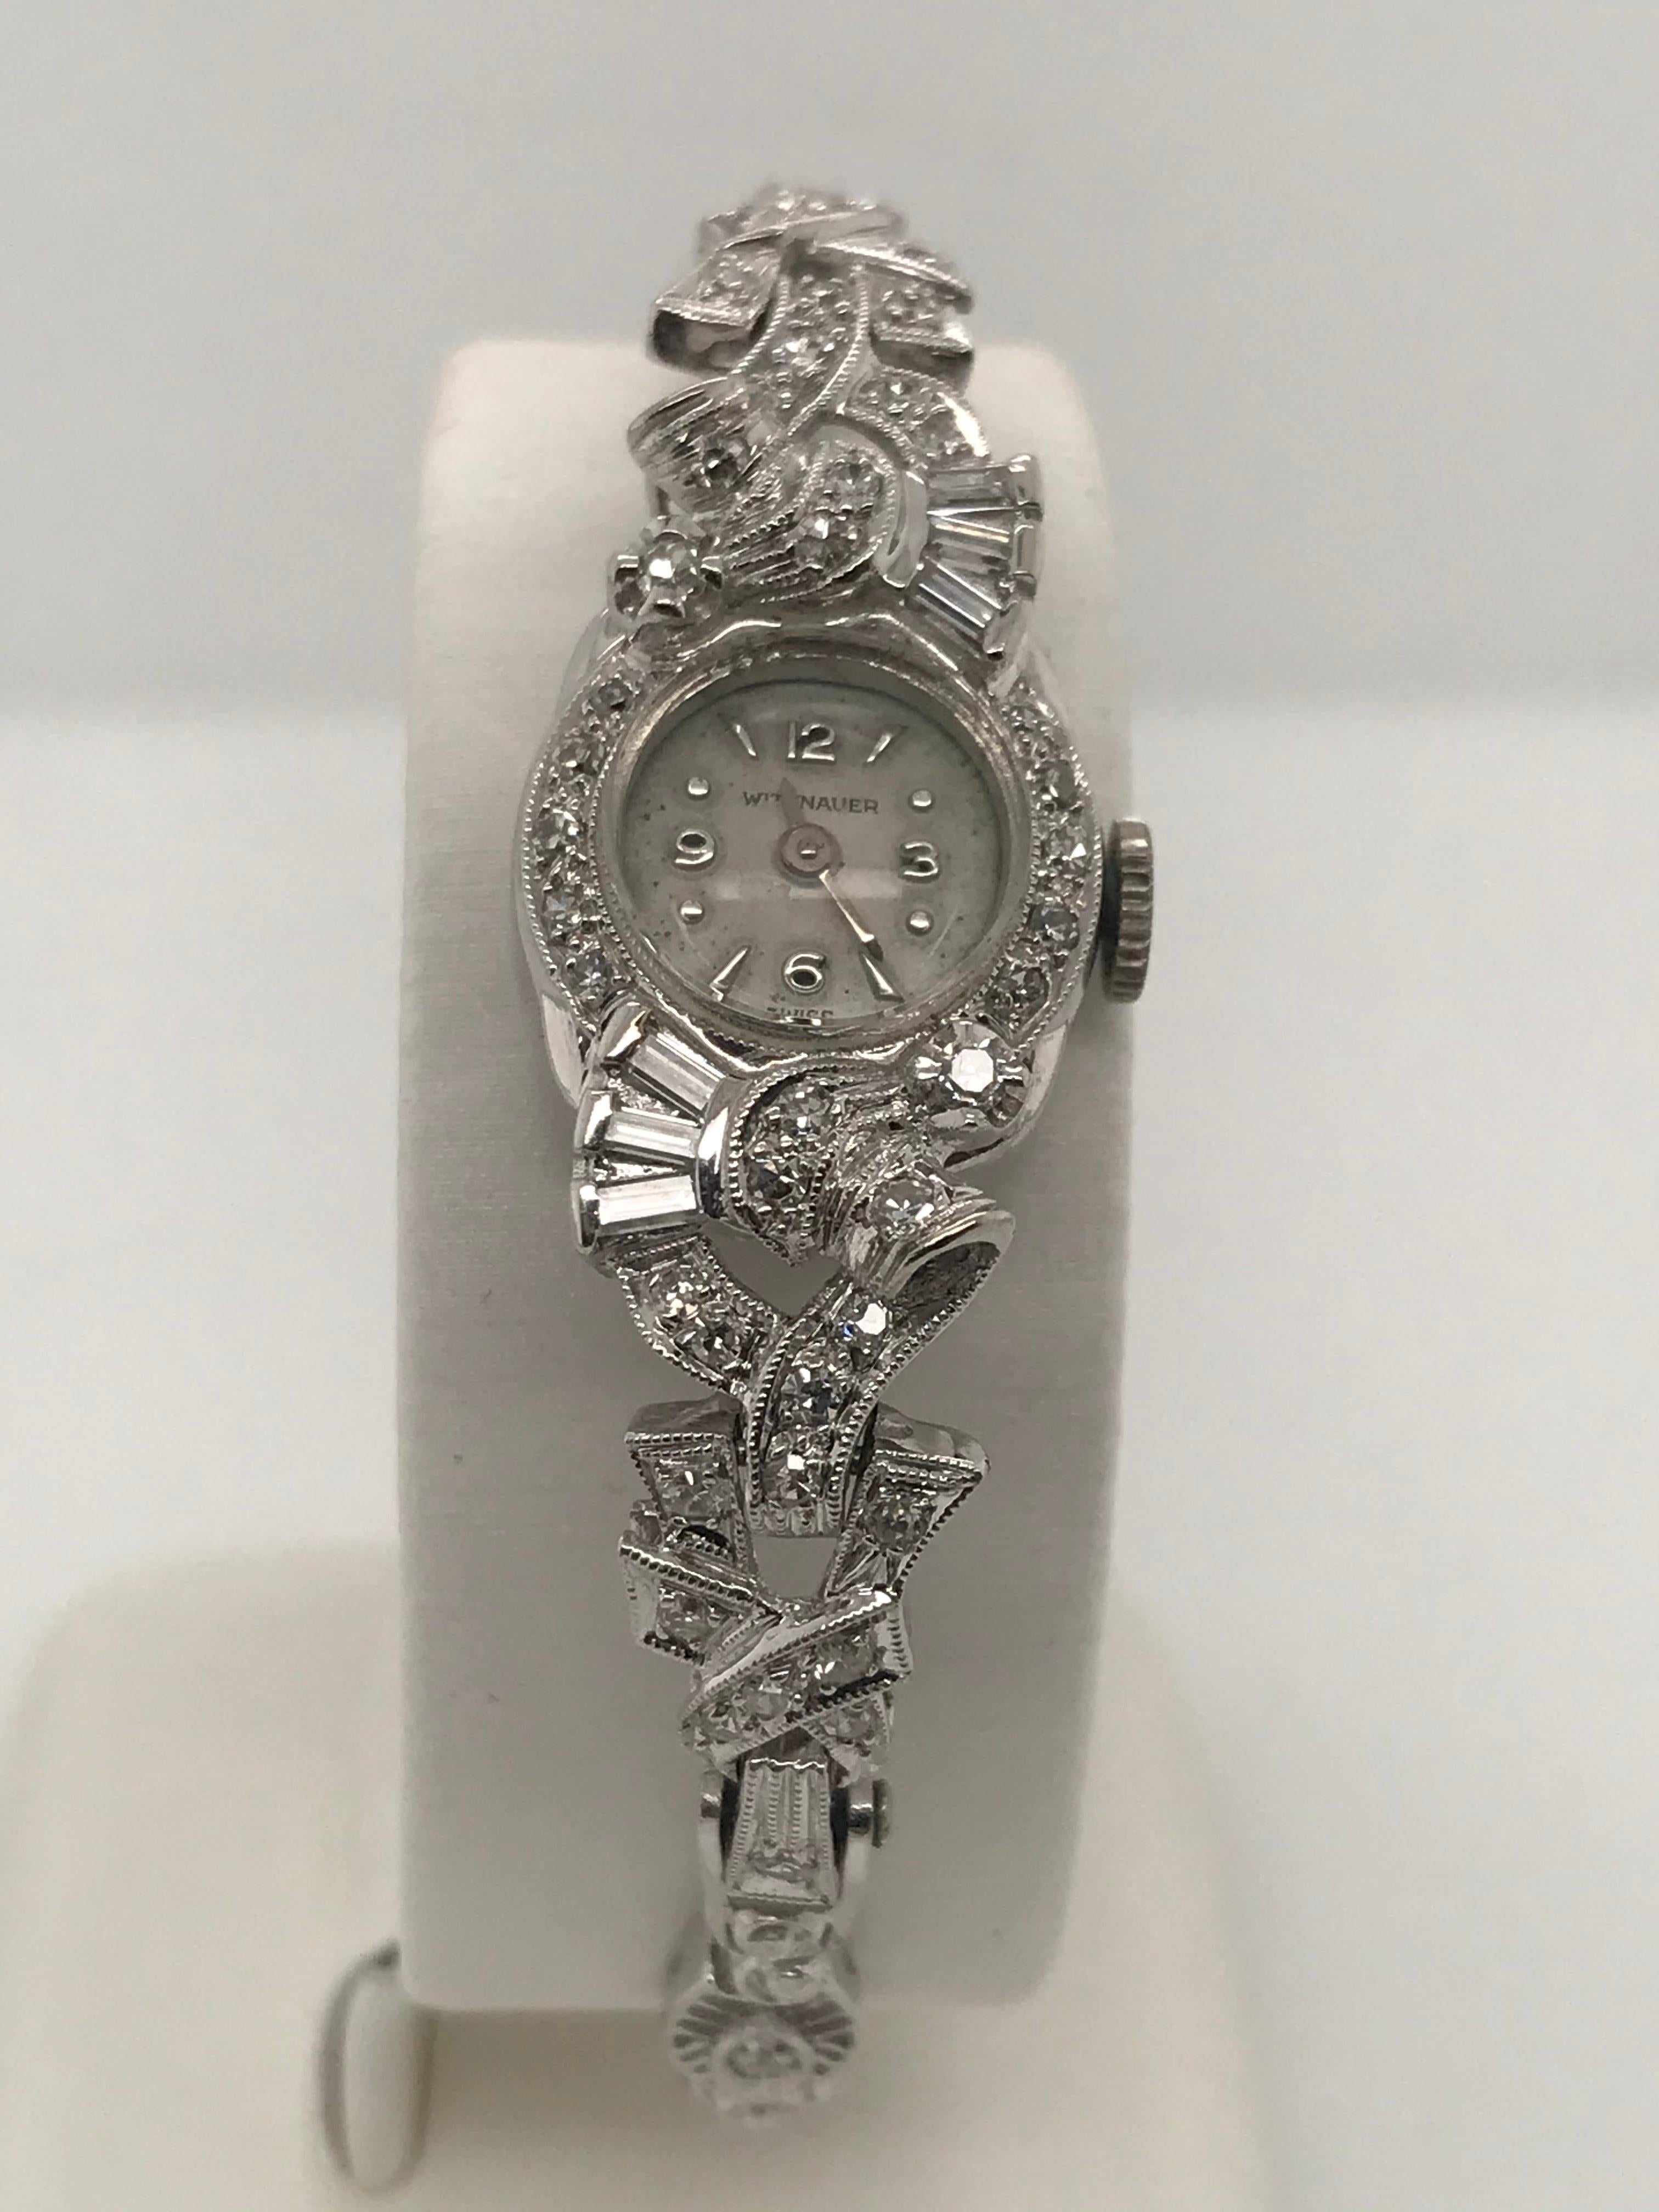 14K white gold 17 jewel Swiss movement Wittnauer watch with 44 single cut diamonds, 8 round brilliant cut diamonds and 6 baguette diamonds with a total weight of approximately 0.67cts. It has a delicate filigree link bracelet with fold over clasp.
  